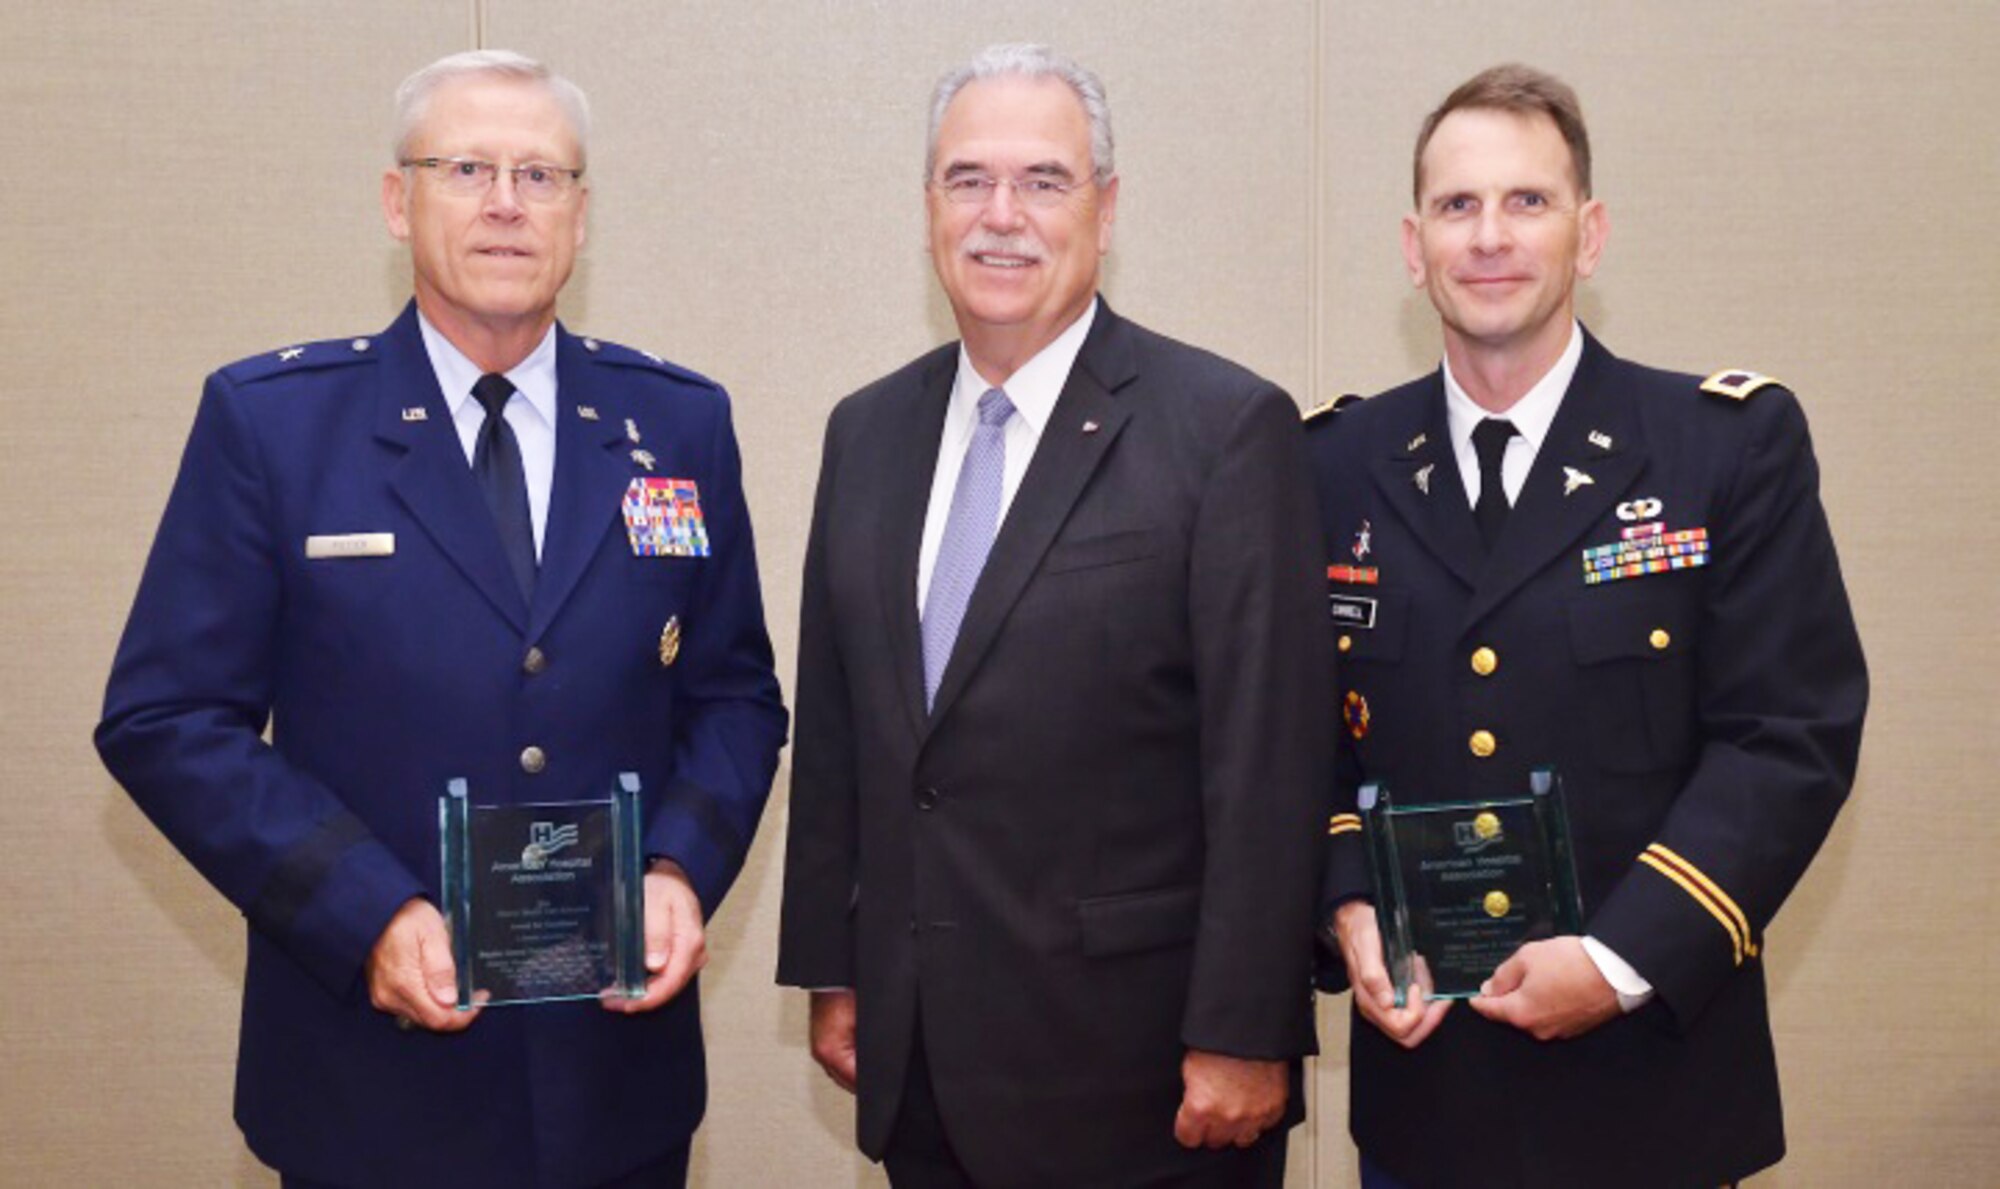 Retired Air Force Brig. Gen. Charles Potter (left) and Army Col. James Carrell (right) received their awards for their service to the health care field from Richard Umbdenstock, American Hospital Association president and CEO.